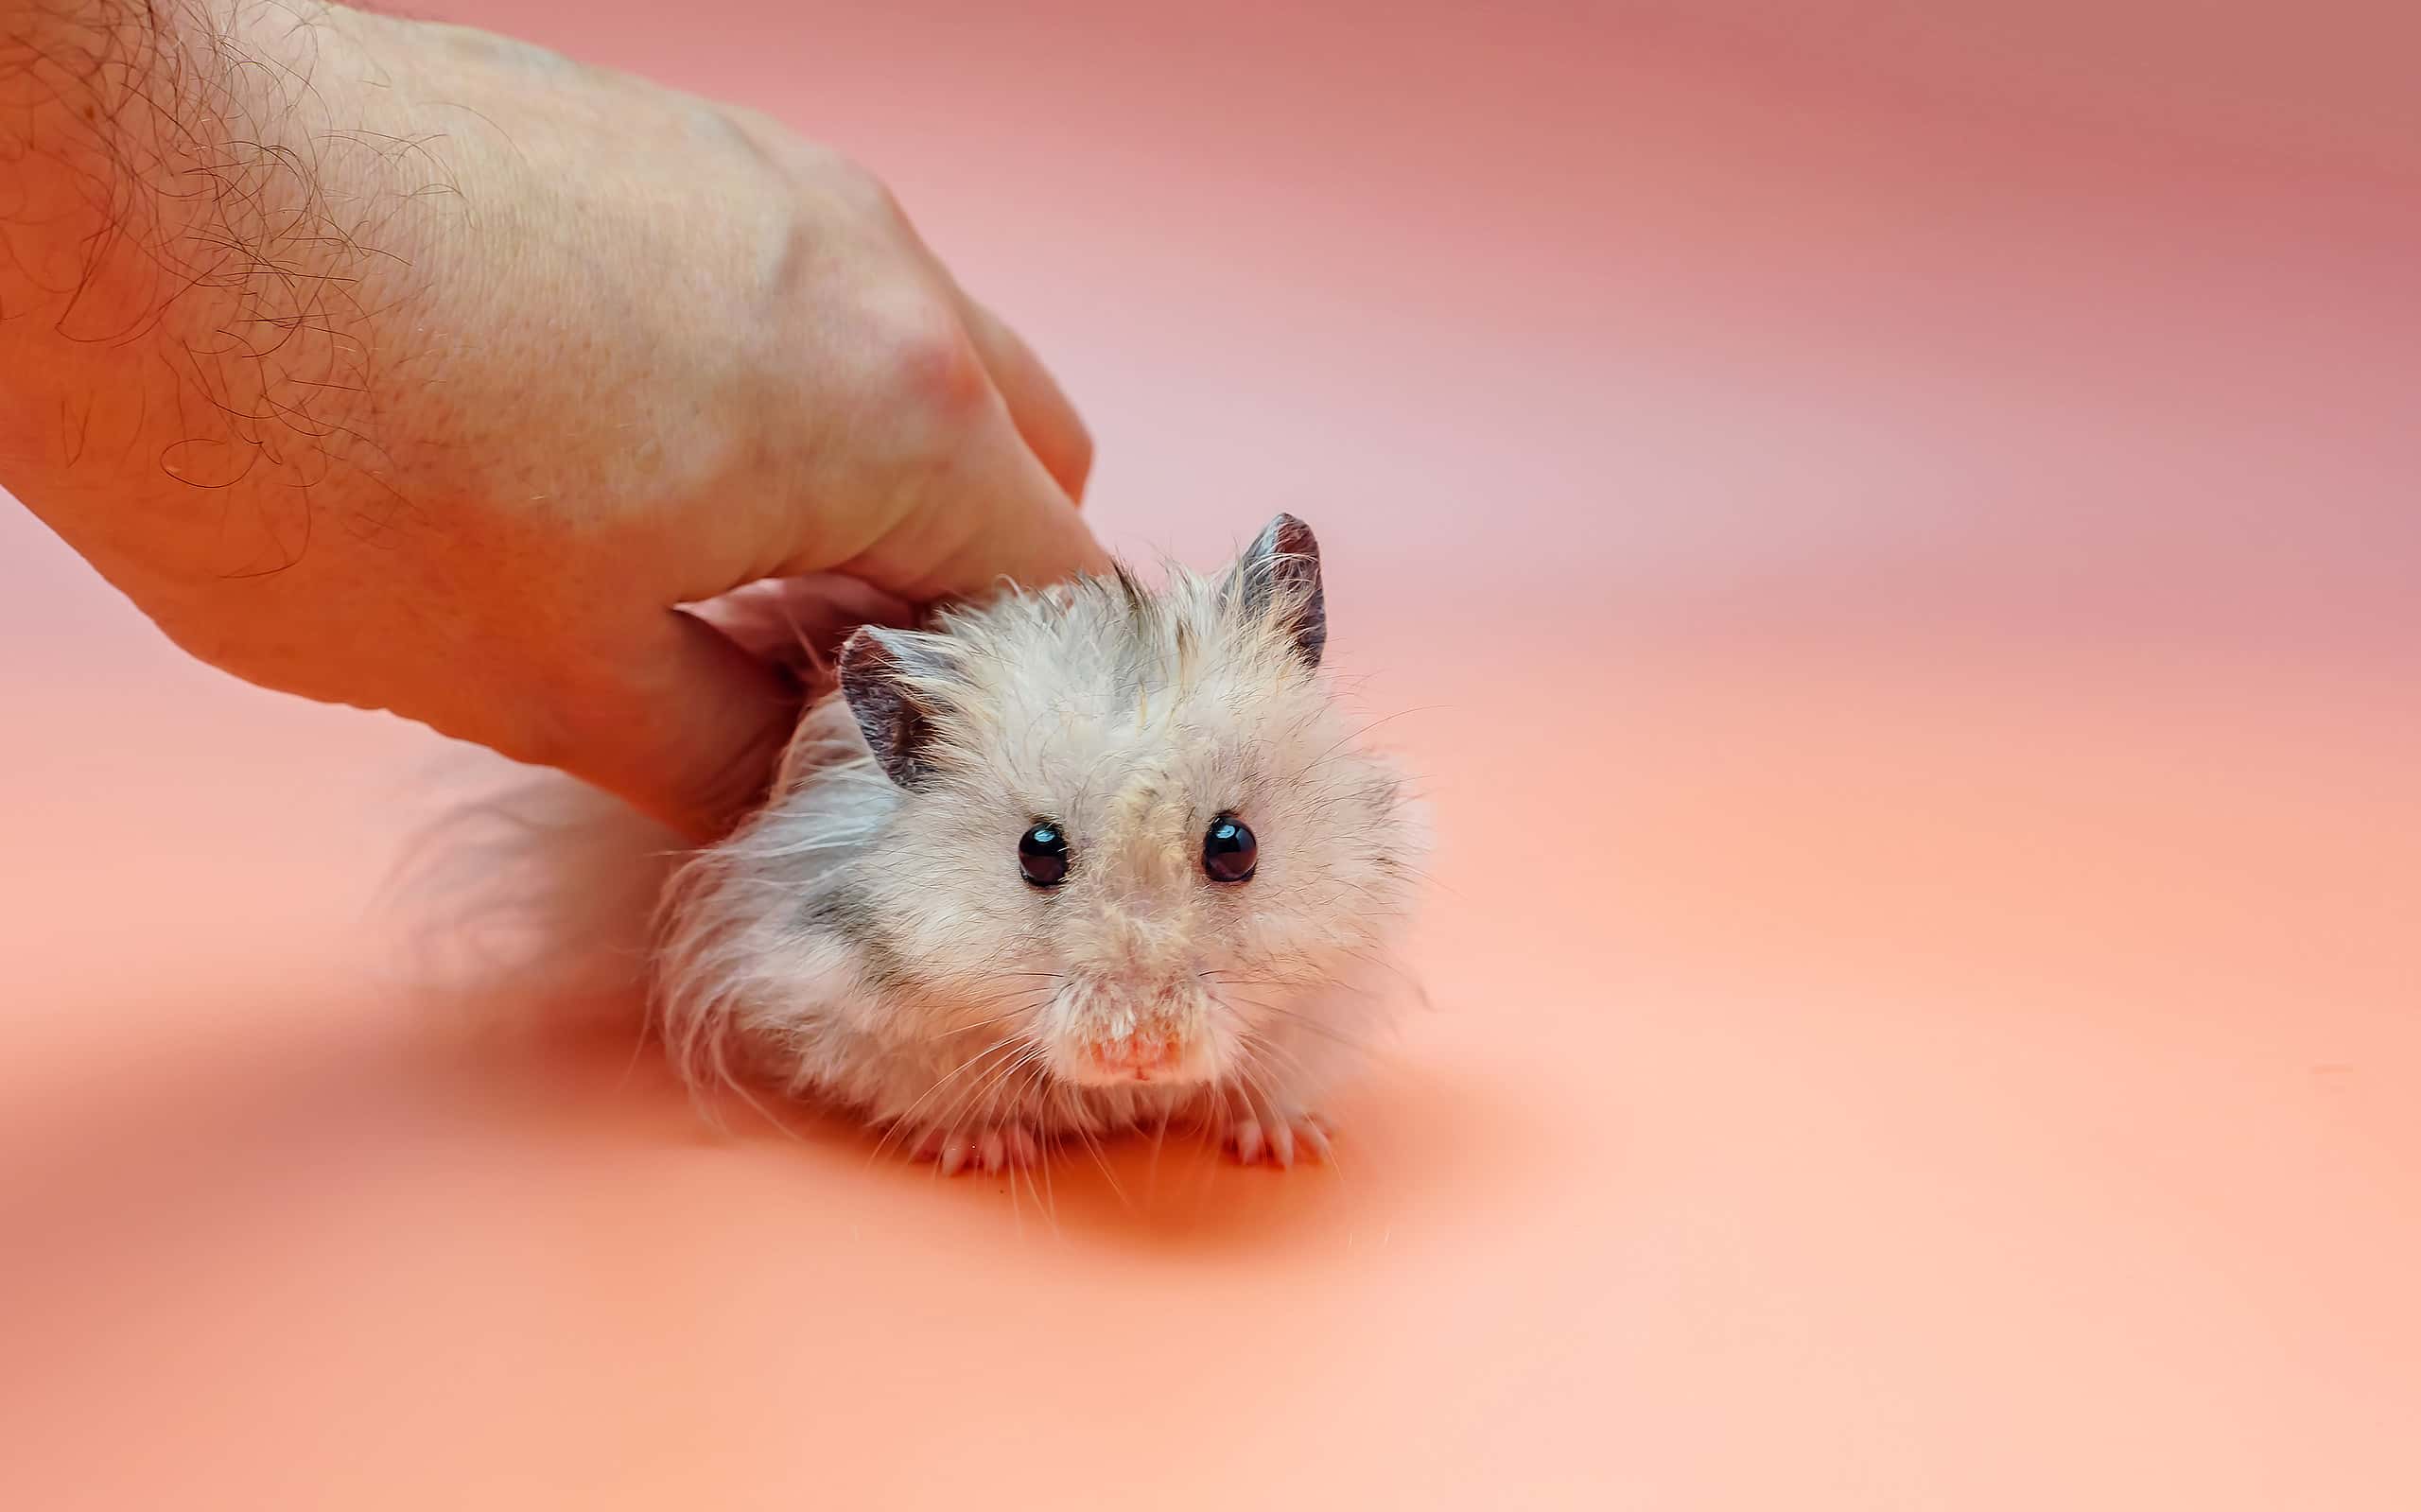 Hand caught grey Syrian hamster on pink background